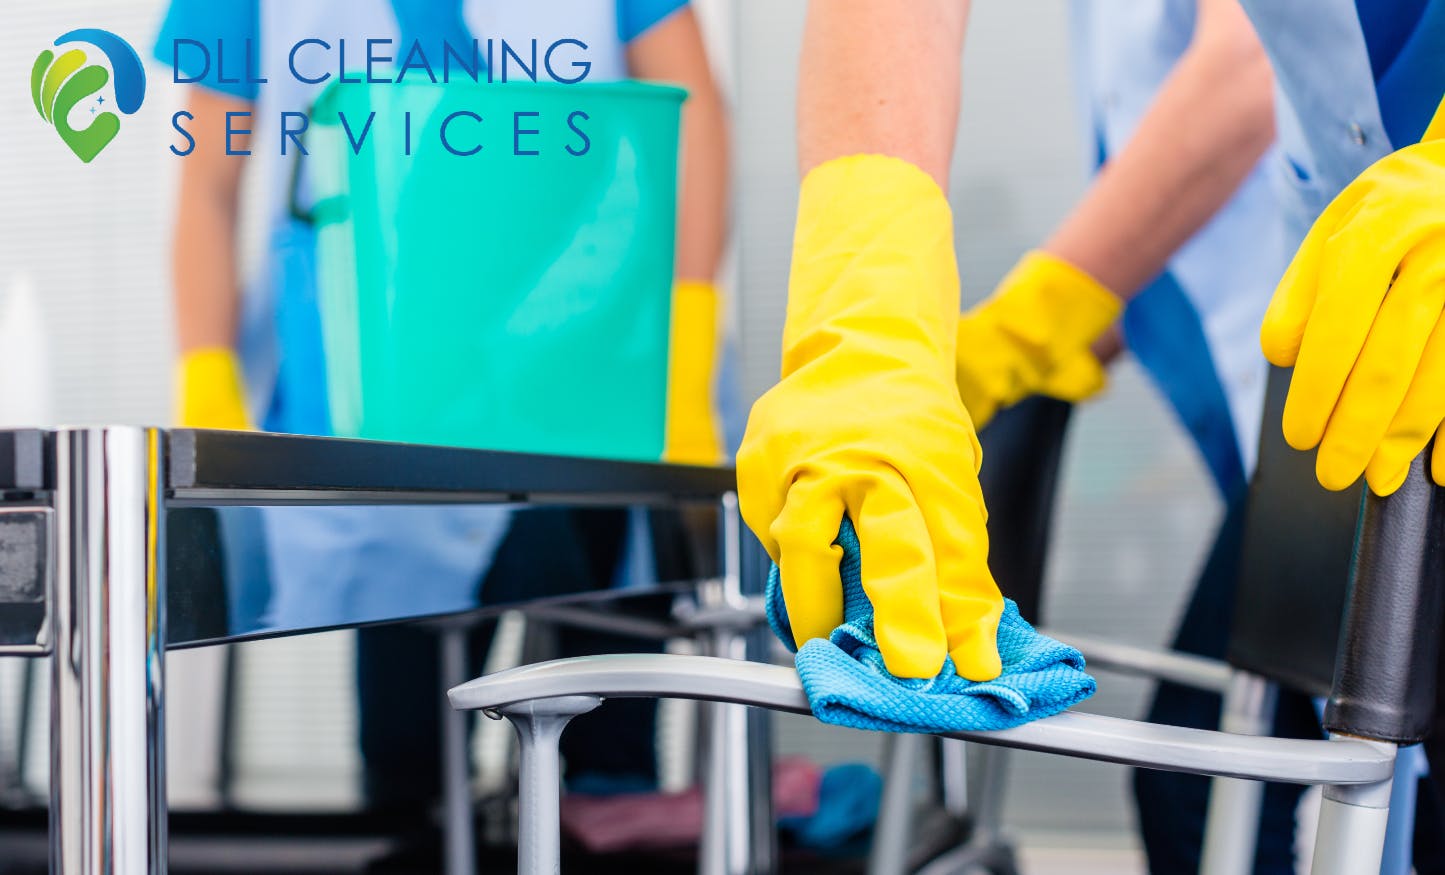 DLL Cleaning Services: Commercial & House Cleaning Full Review